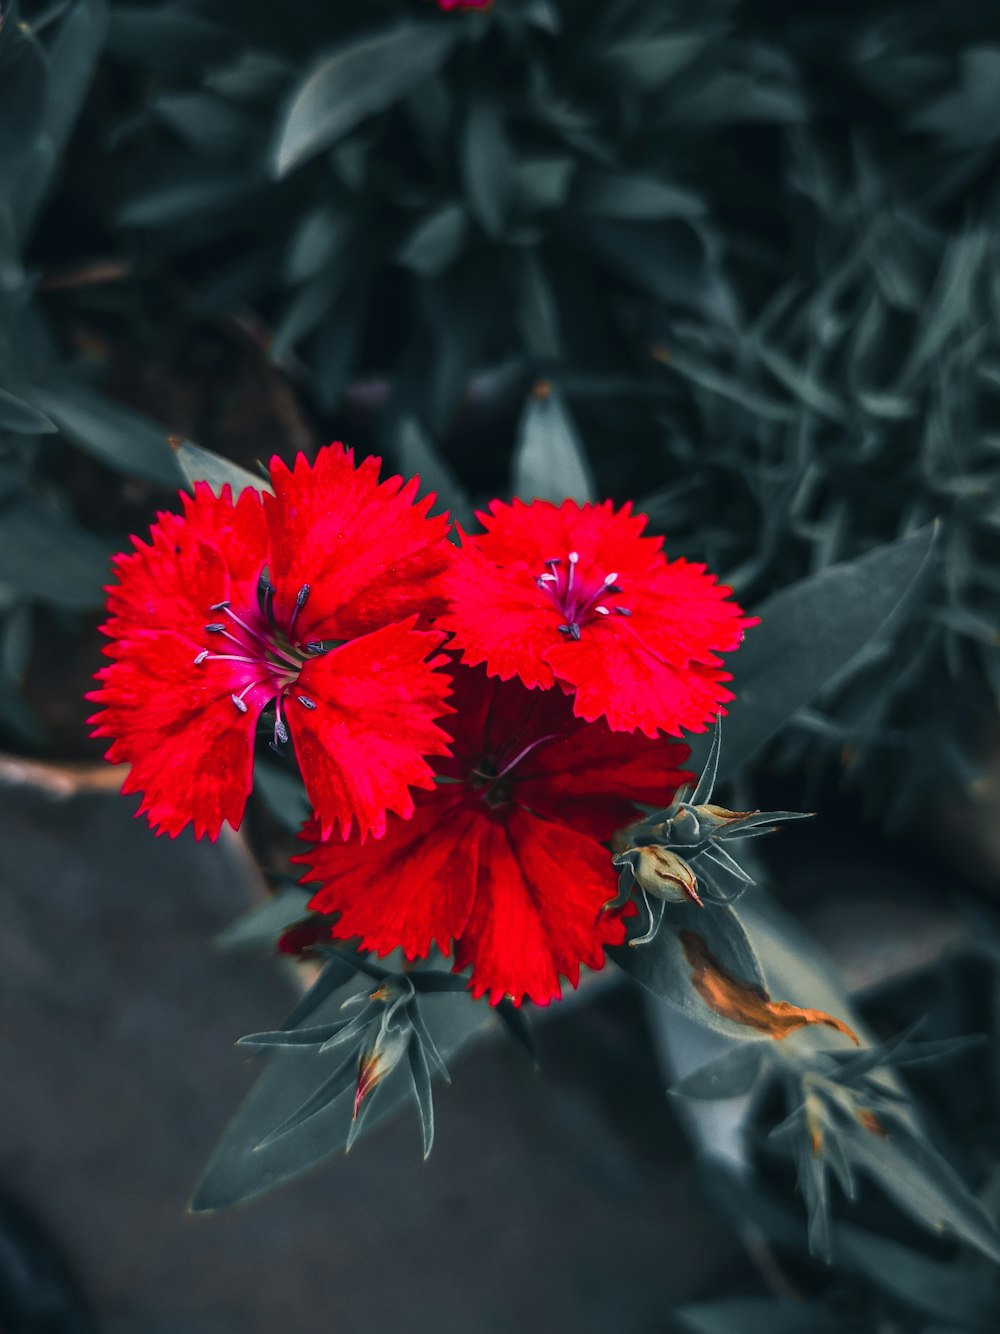 A close up of a red flower on a plant photo – Free Meraz3014 Image ...